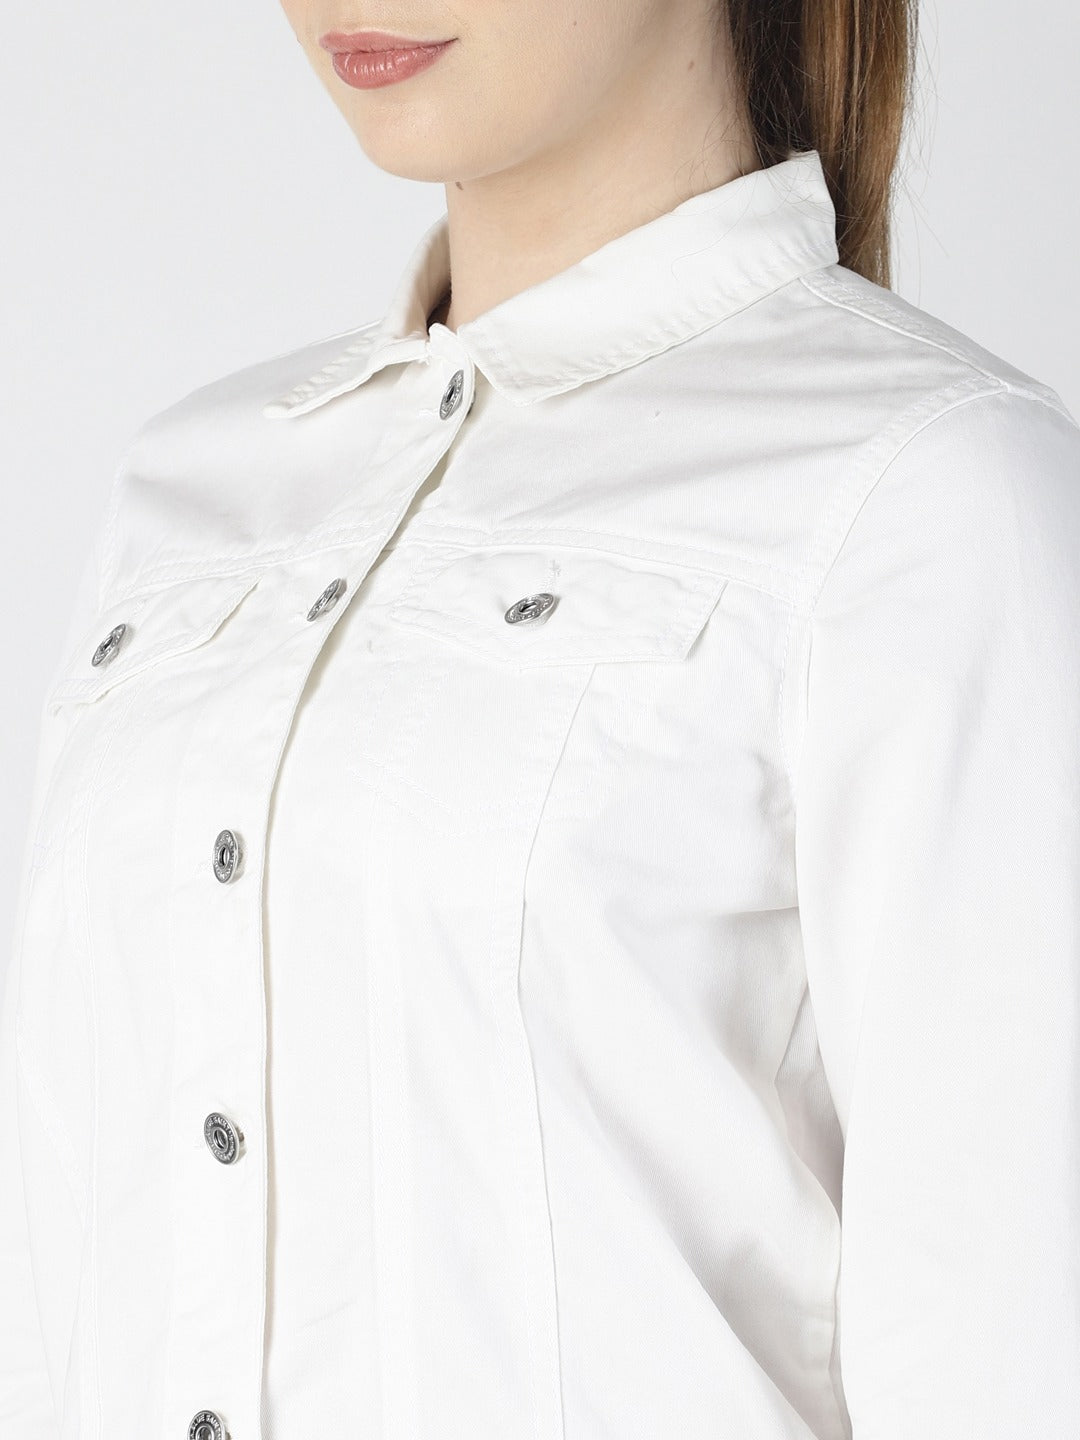 Women's White Solid Denim Jacket
A stylish and versatile denim jacket in a sleek, solid white color, perfect for any casual outfit.